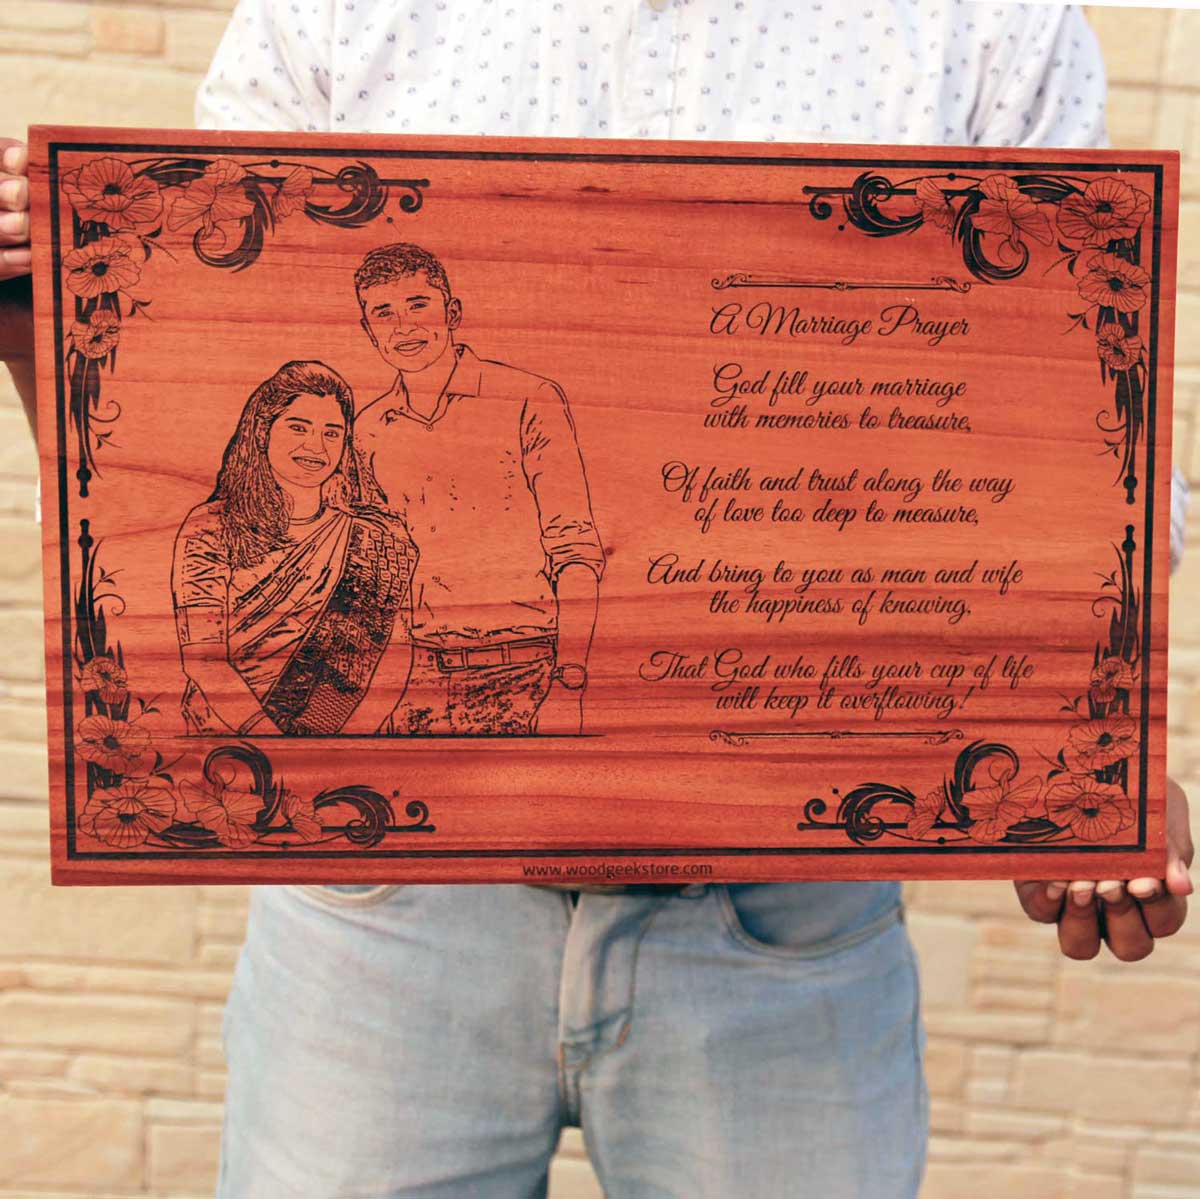 Presto Personalized Wooden Engraved Birthday Gift Photo Frame for Husband :  Amazon.in: Home & Kitchen